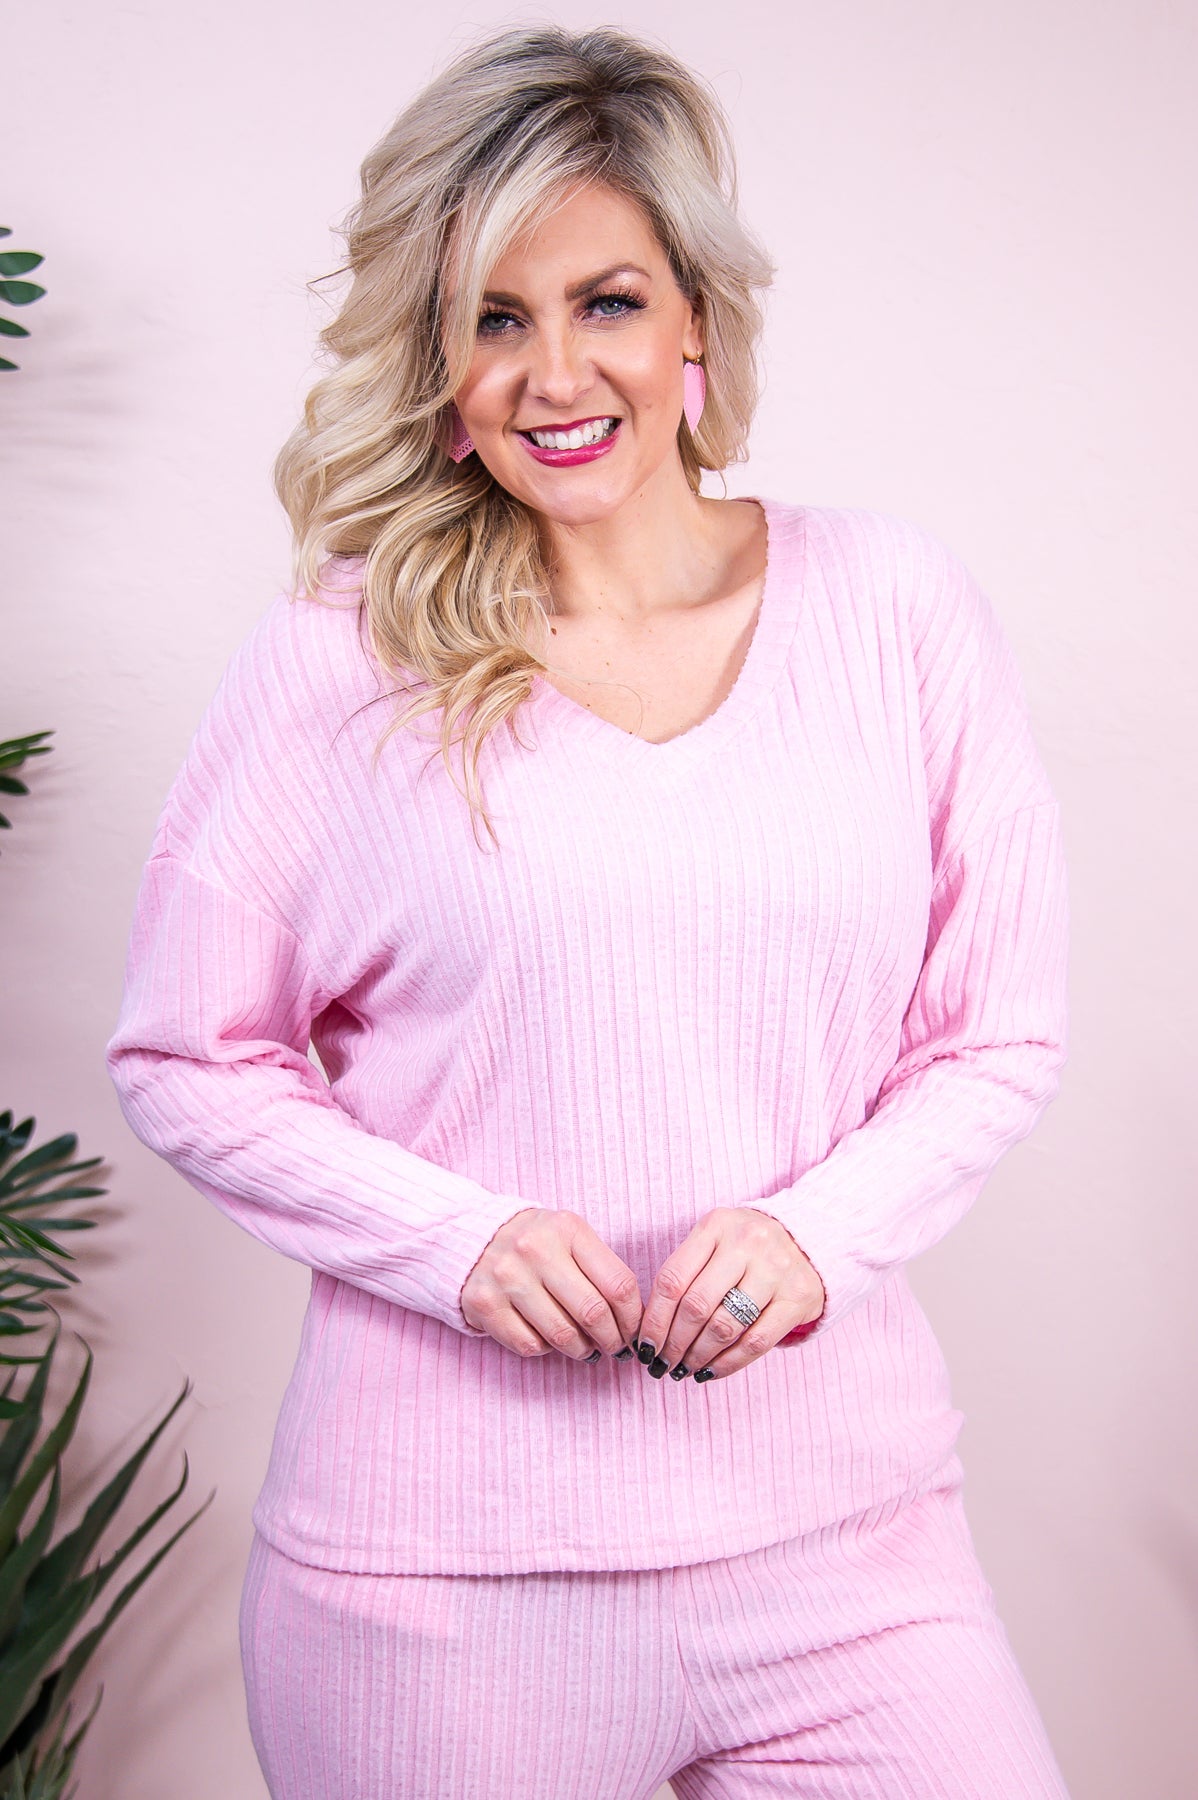 Lounging In Style Light Pink Solid Ribbed Top/Pant (2 Piece Set) - T8729LPK